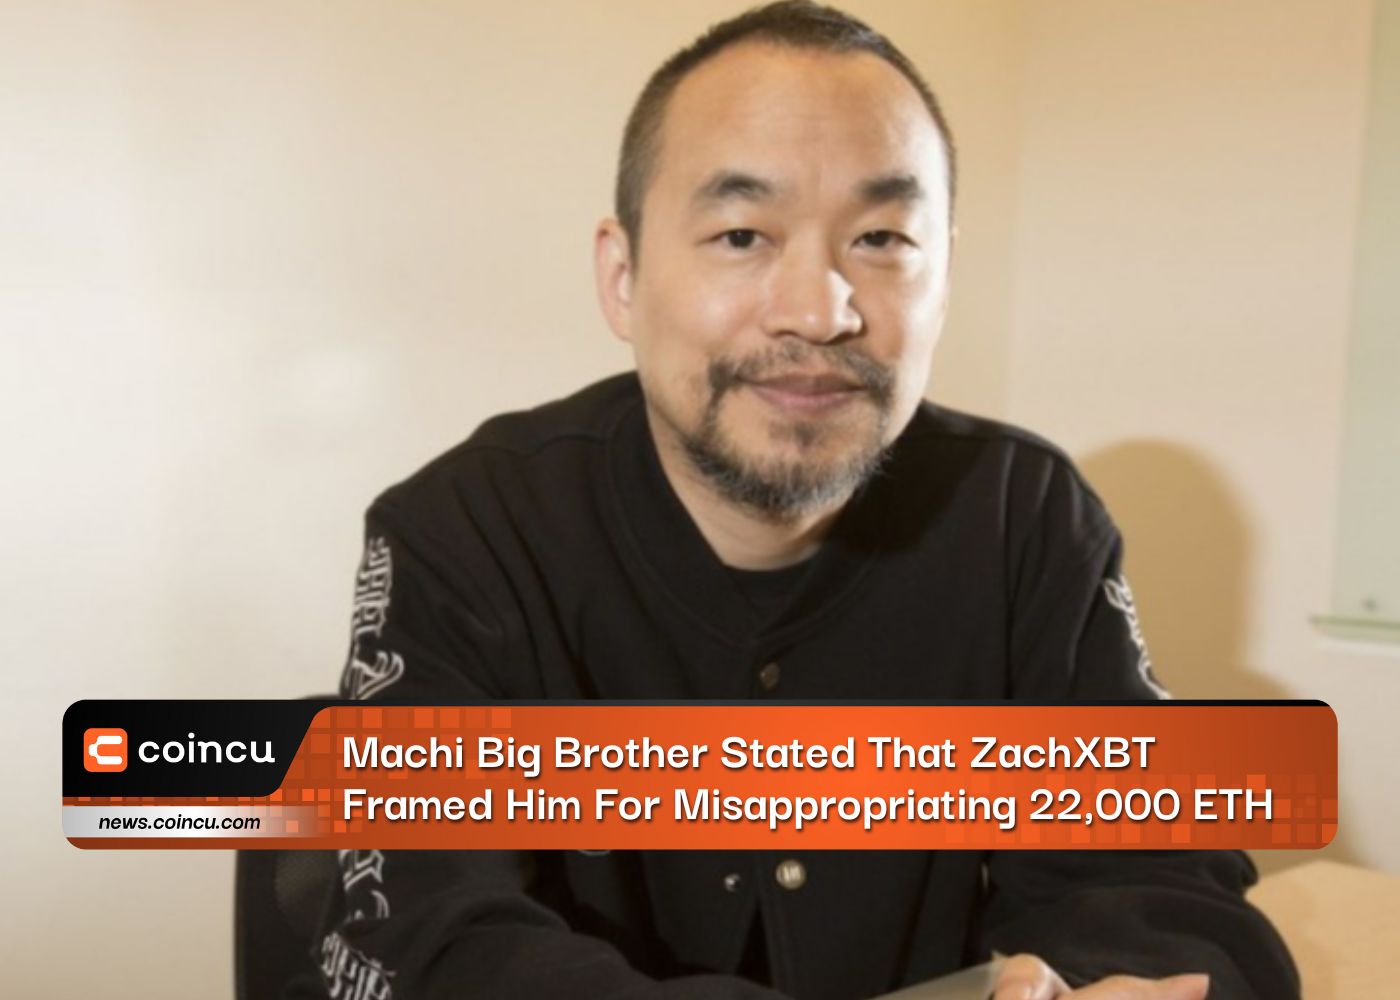 Machi Big Brother Stated That ZachXBT Framed Him For Misappropriating 22,000 ETH